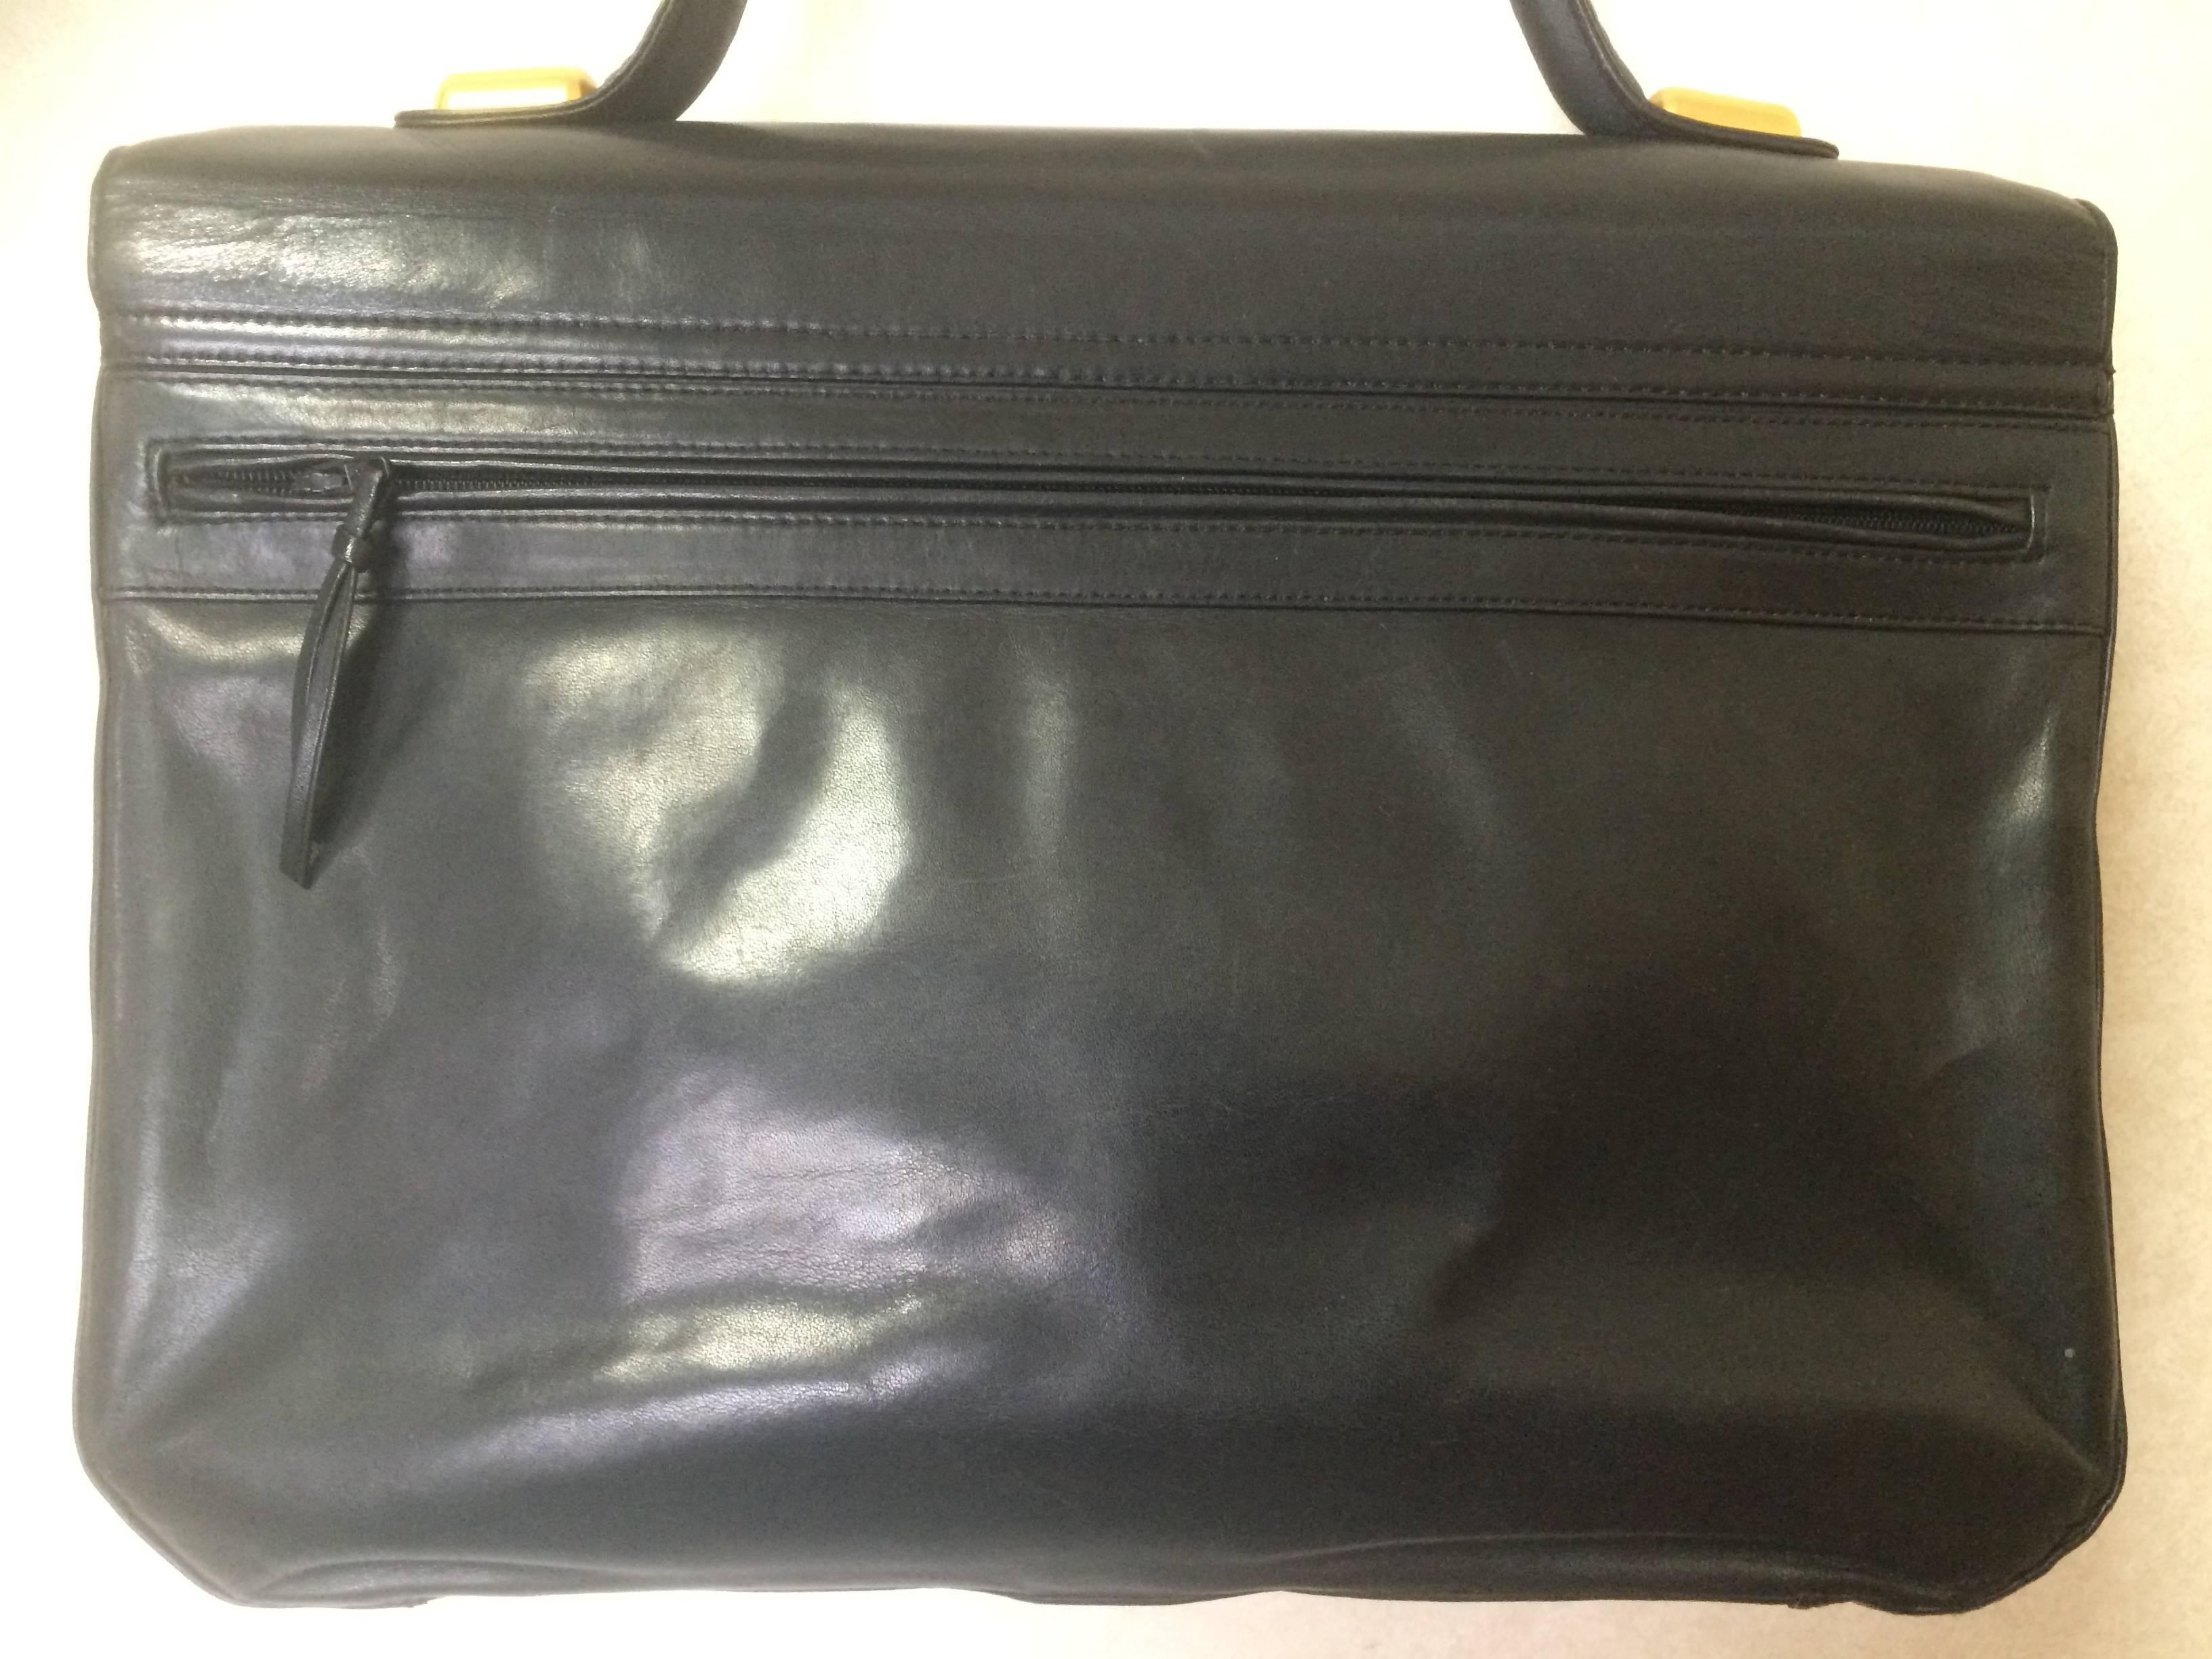 1980s. Vintage Bally black leather retro pop design bag, business purse with gold tone drawstrings and unique flap cut design.  Unisex use.

Introducing another very rare vintage piece from BALLY in the 80s...
One of the rarest pieces back in the